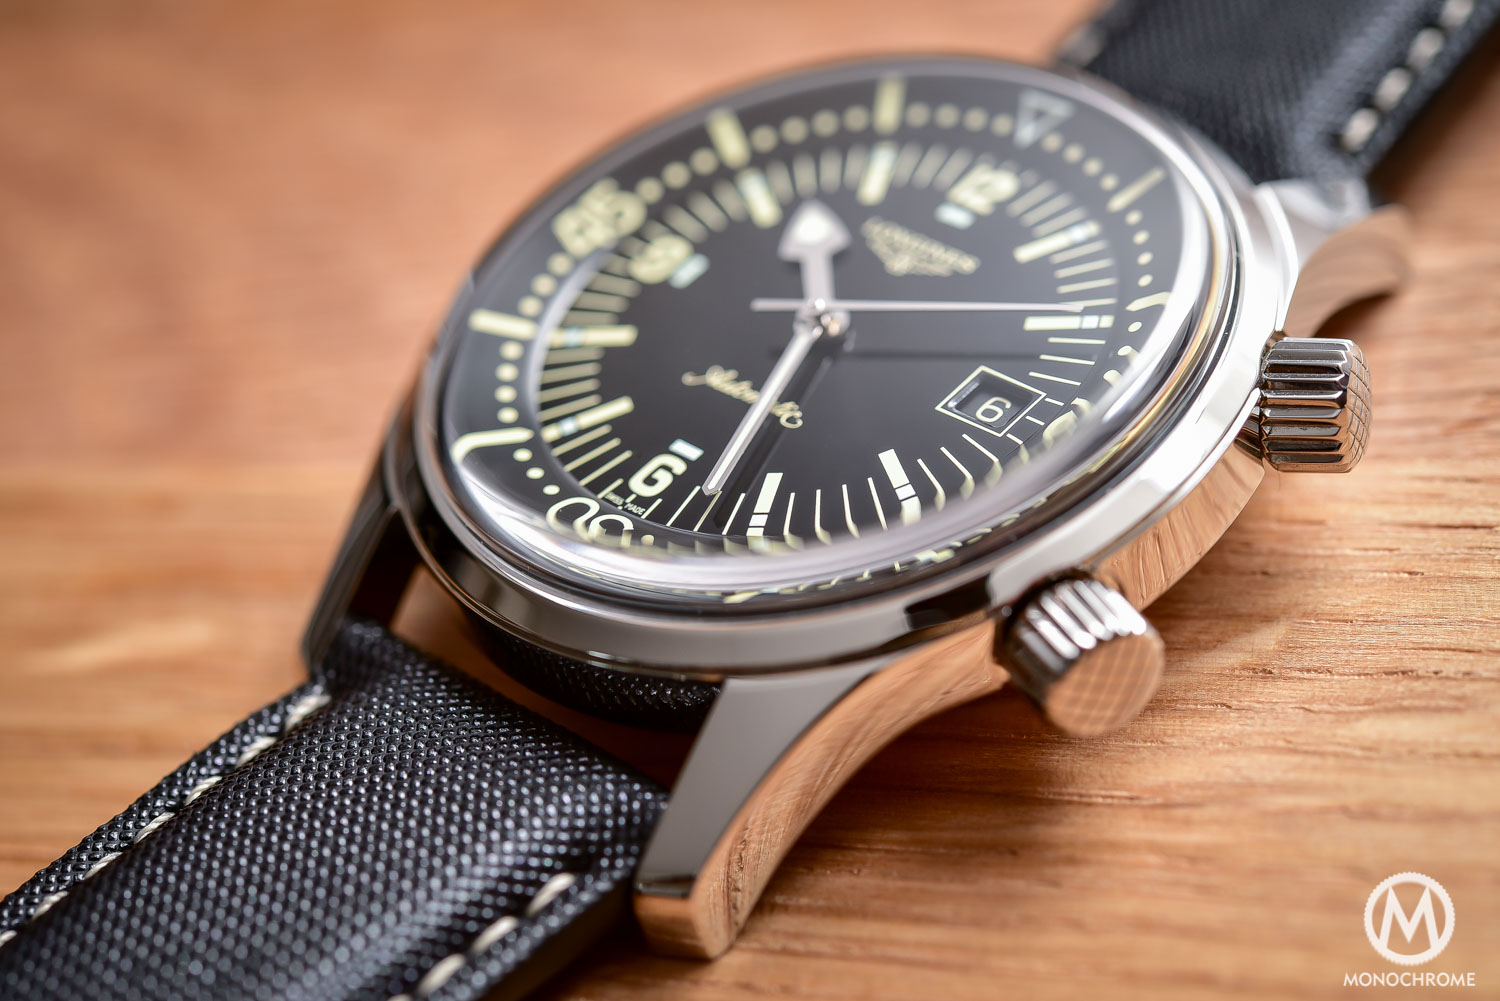 Comparative Review - 3 affordable & vintage-inspired dive watches - Longines Legend Diver - 5